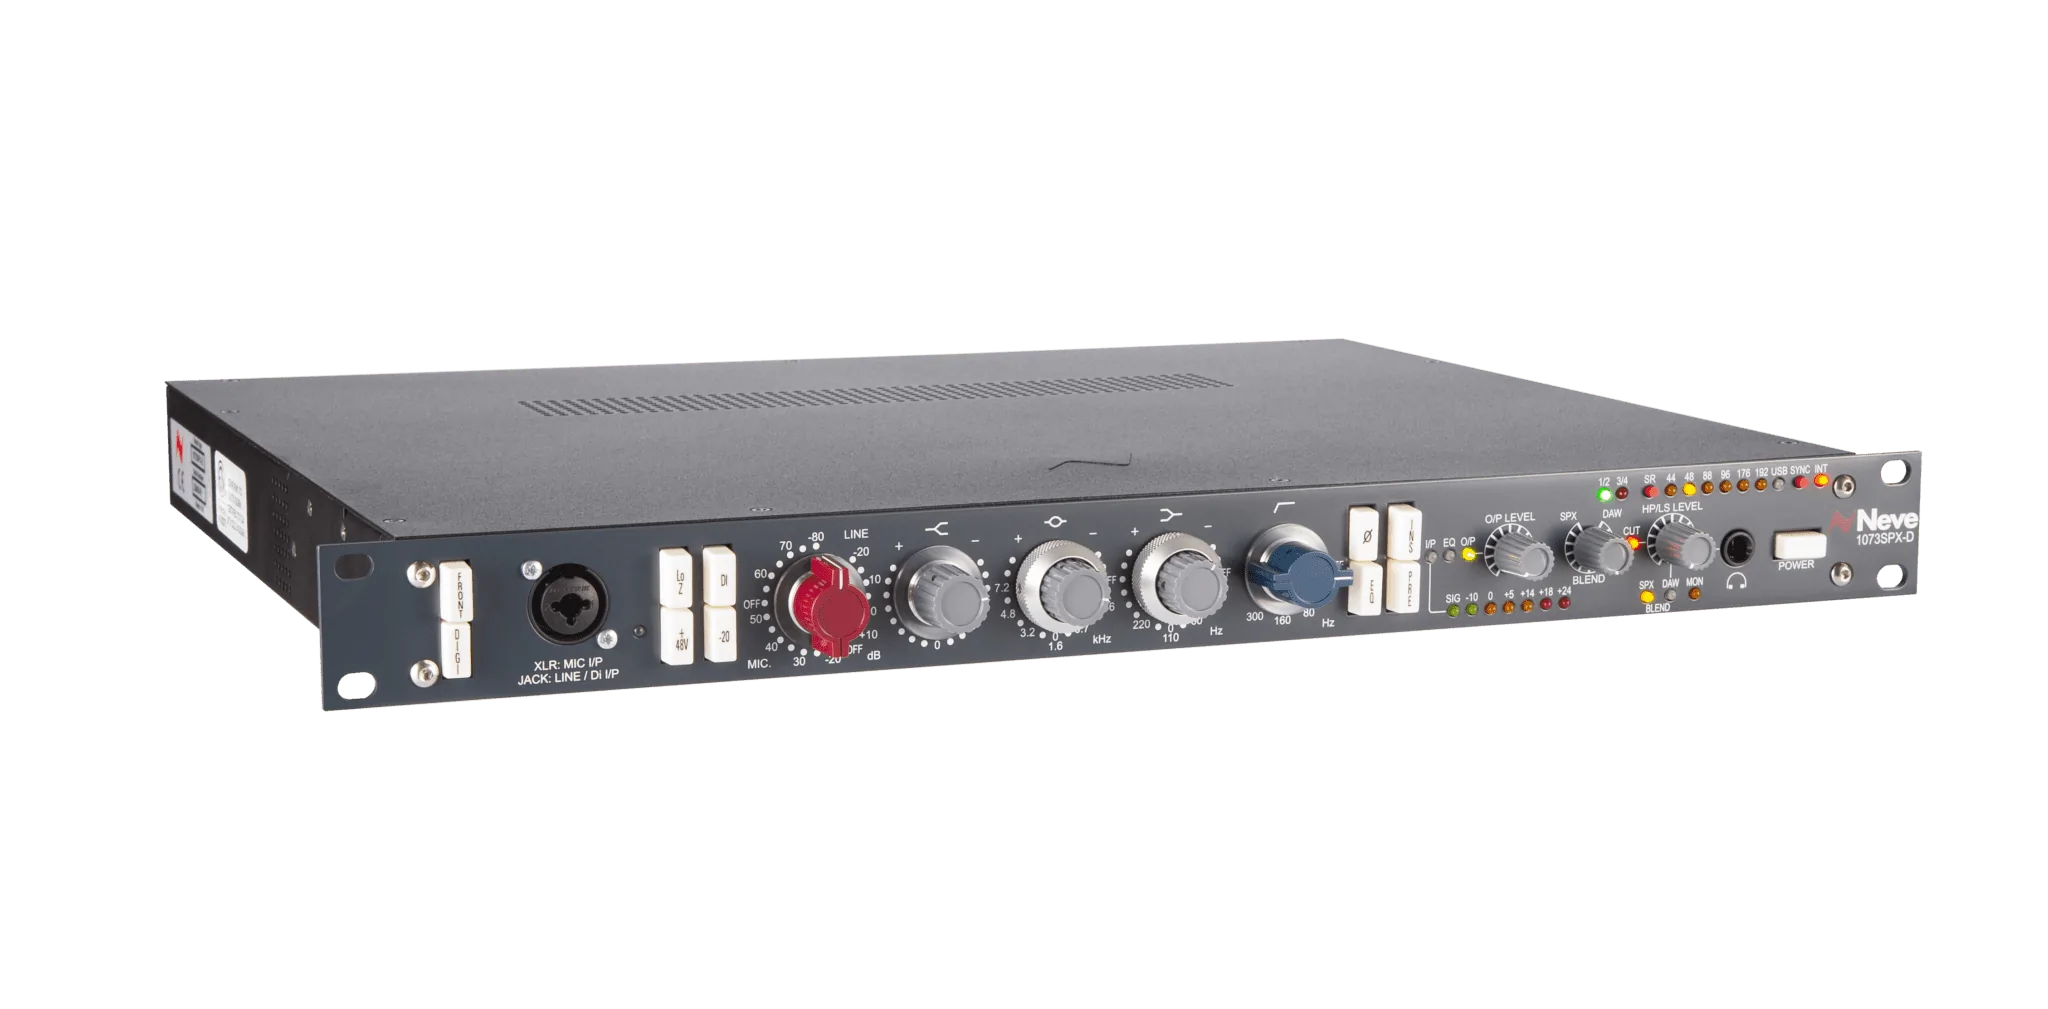 AMS Neve 1073SPX-D - The World’s First Genuine 1073® Interface